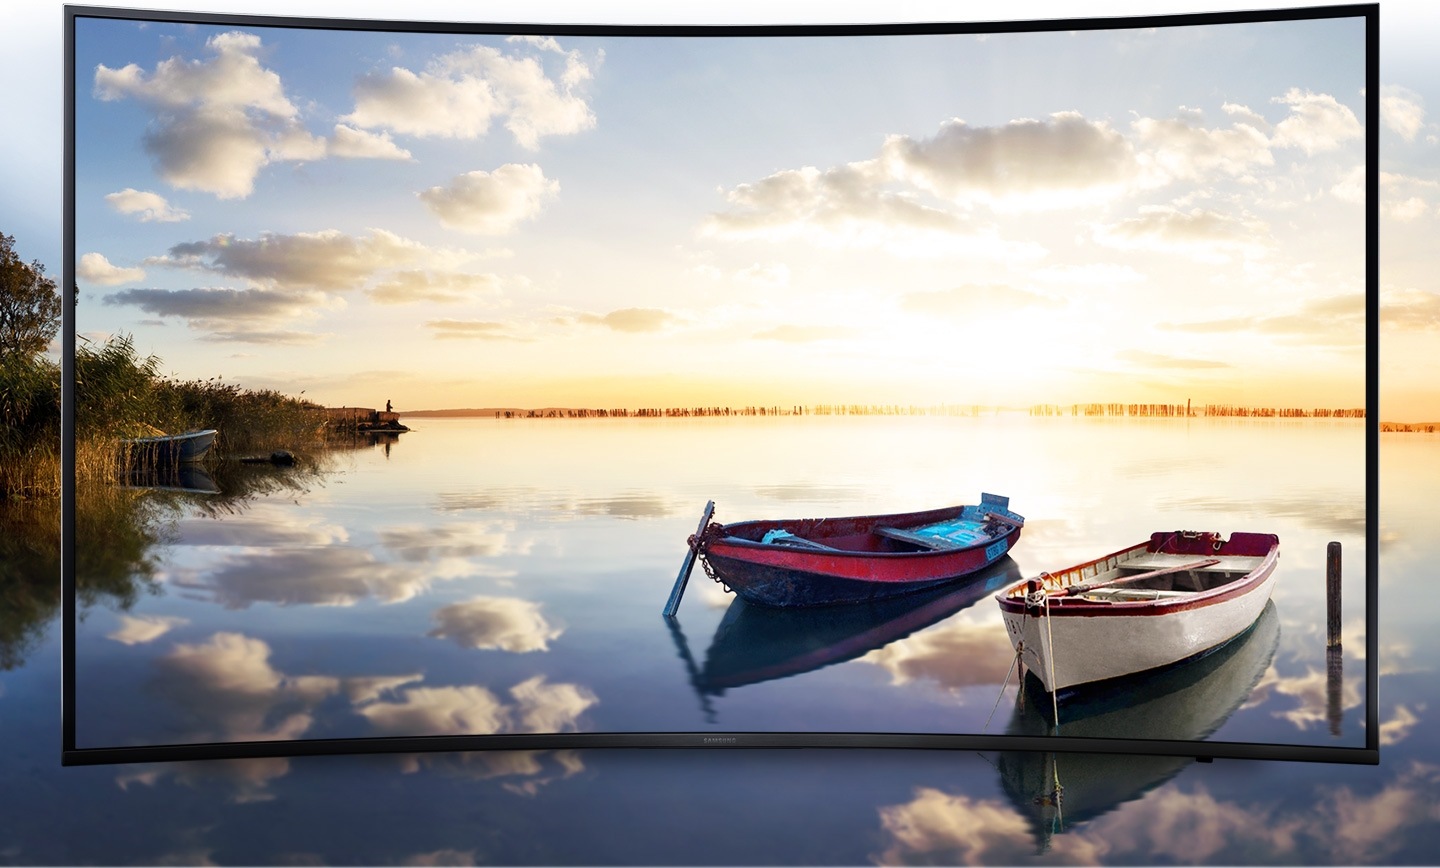 Bright and lively landscape image is on Samsung UHD TV screen.